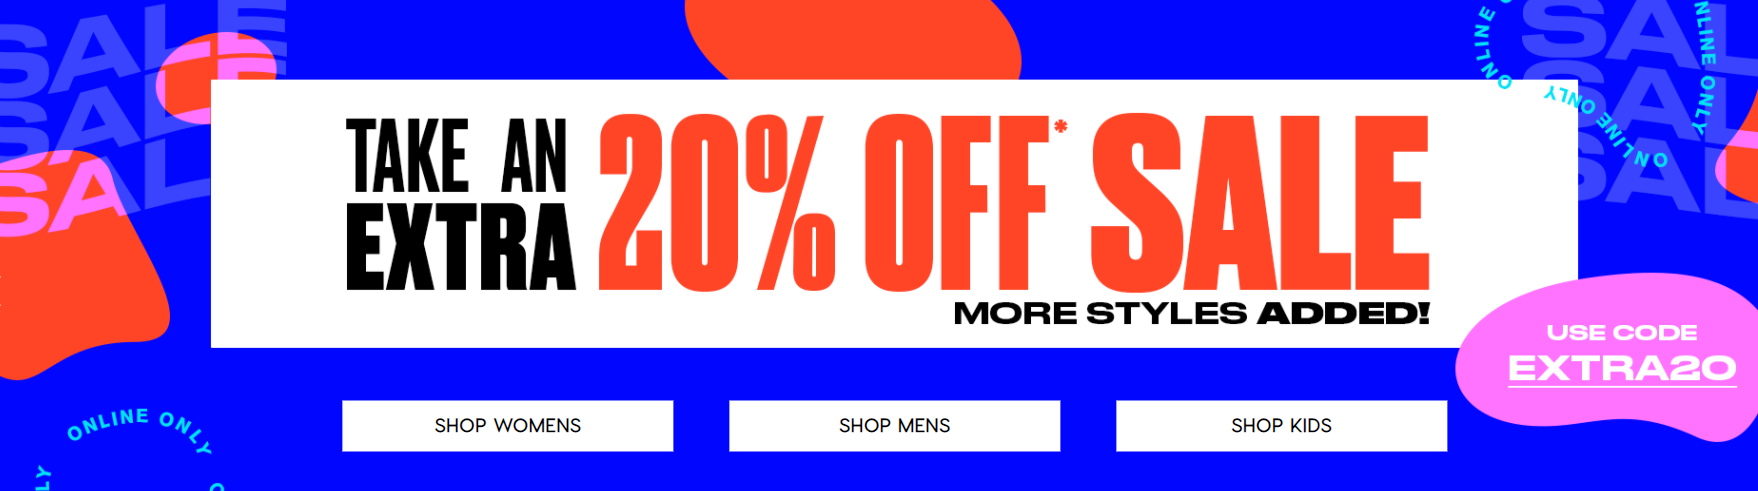 City Beach extra 20% OFF on sale items from clothing, footwear & accessories with coupon